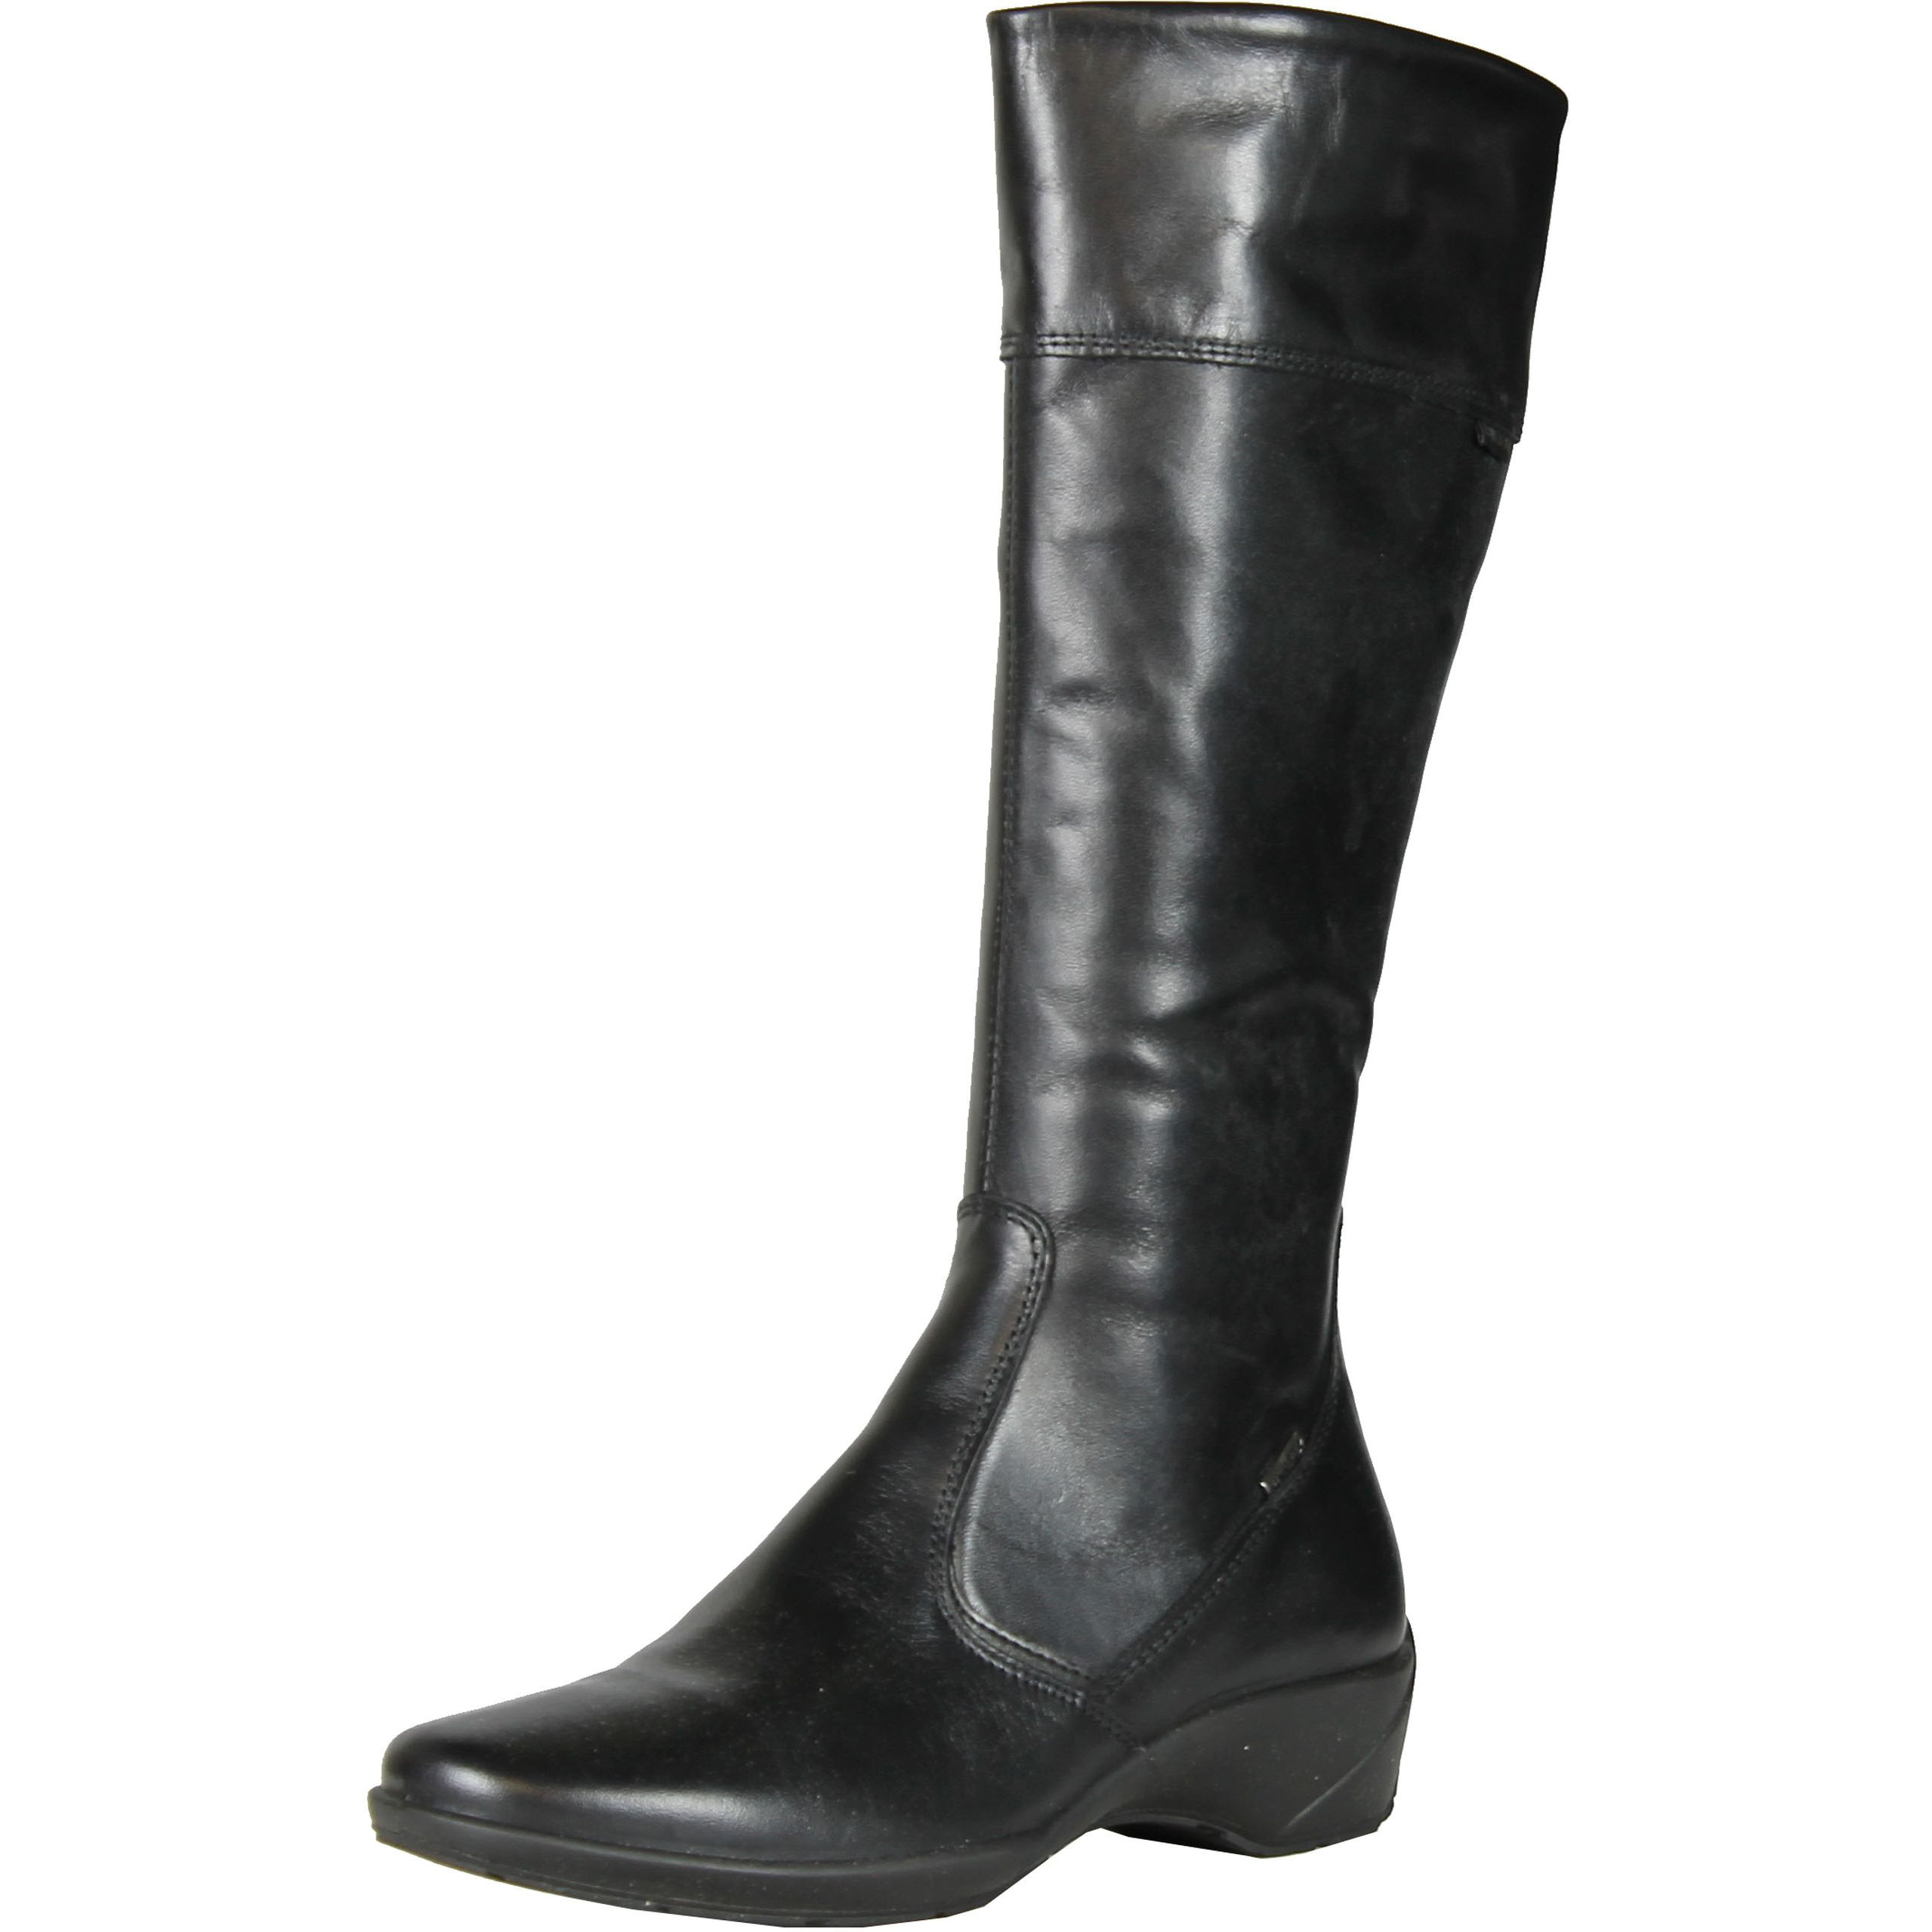 IMAC Womens 52368 Fashion Leather Boots Made In Italy 758418929207 | eBay